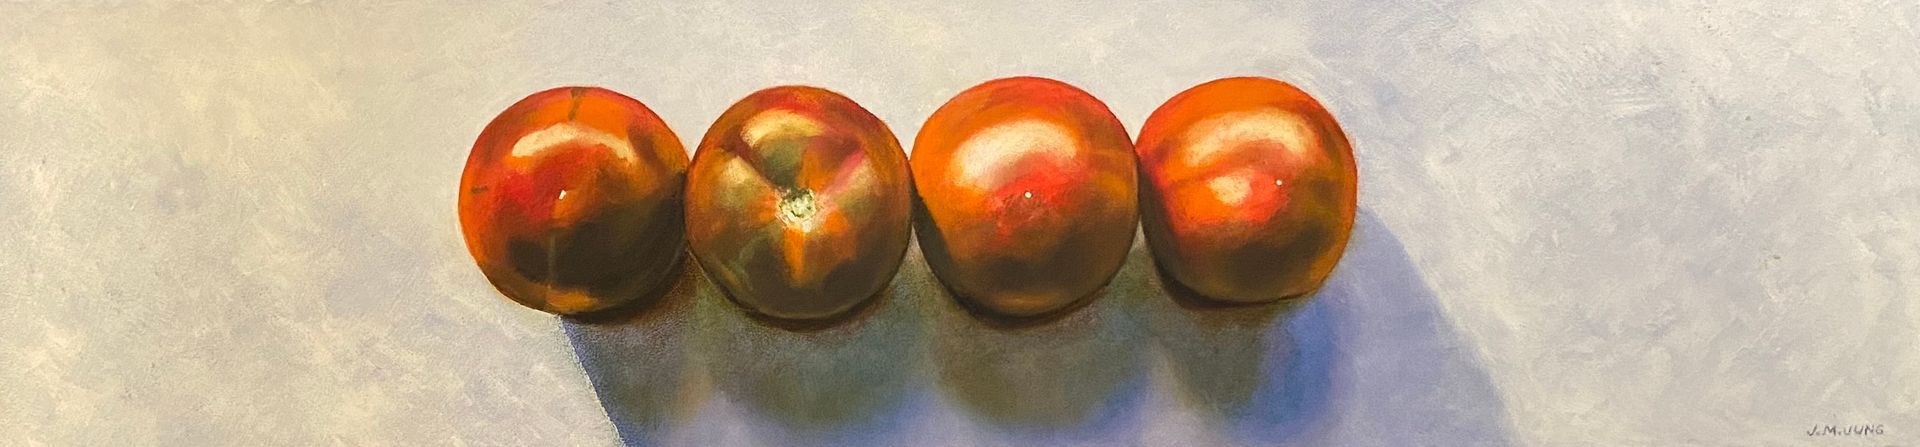 Looking down on four tomatoes against a gray background. Some of the tomatoes are brown to red as it's a brown variety.